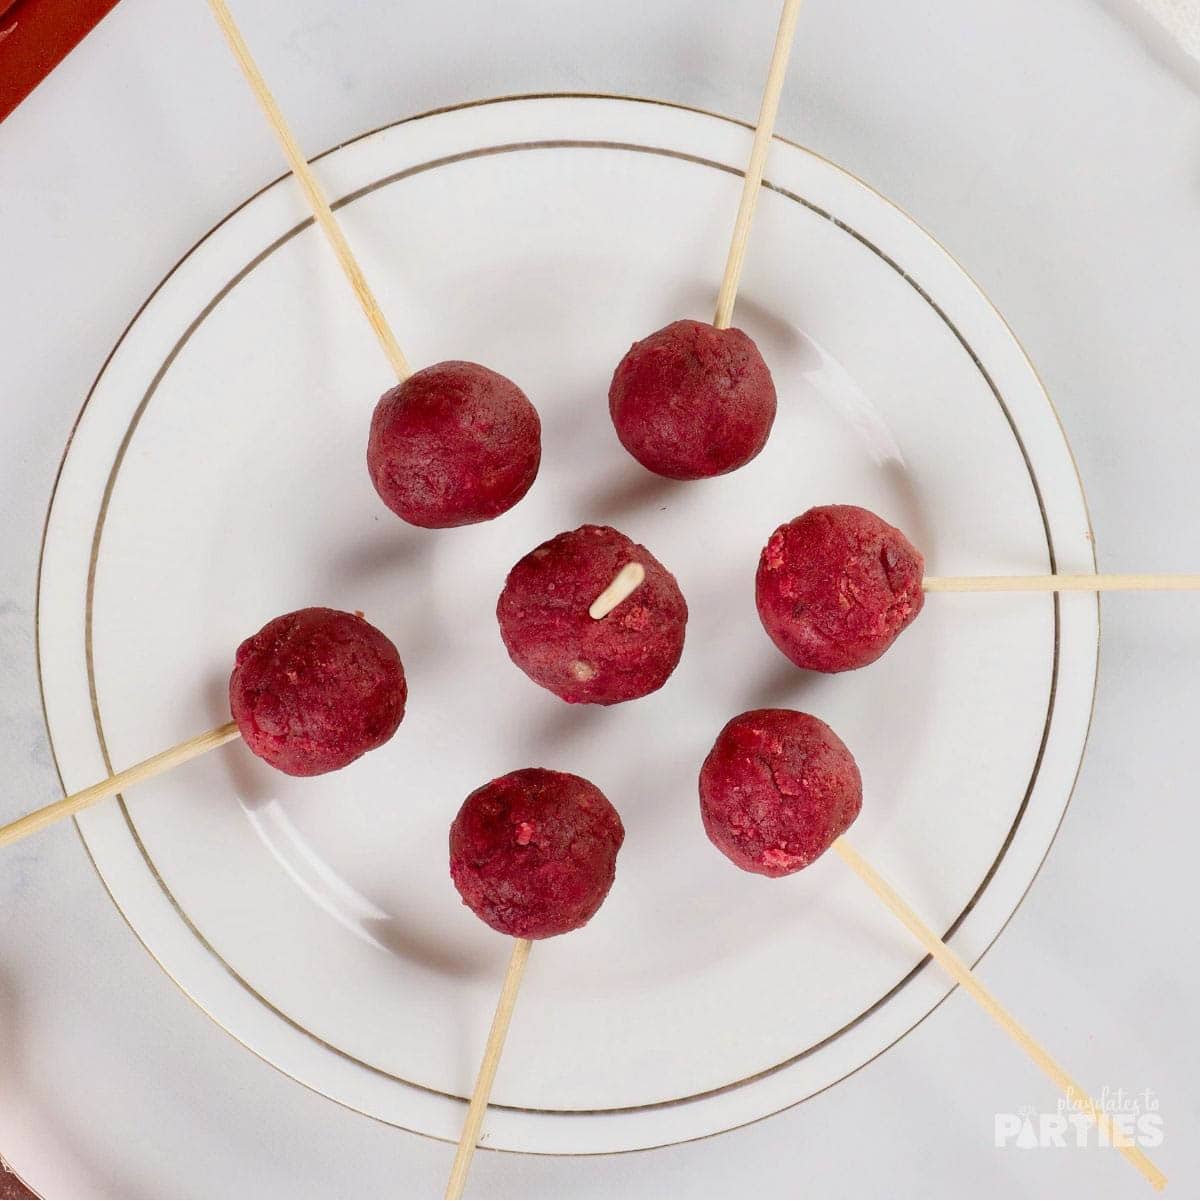 Bamboo skewers inserted into cake balls.